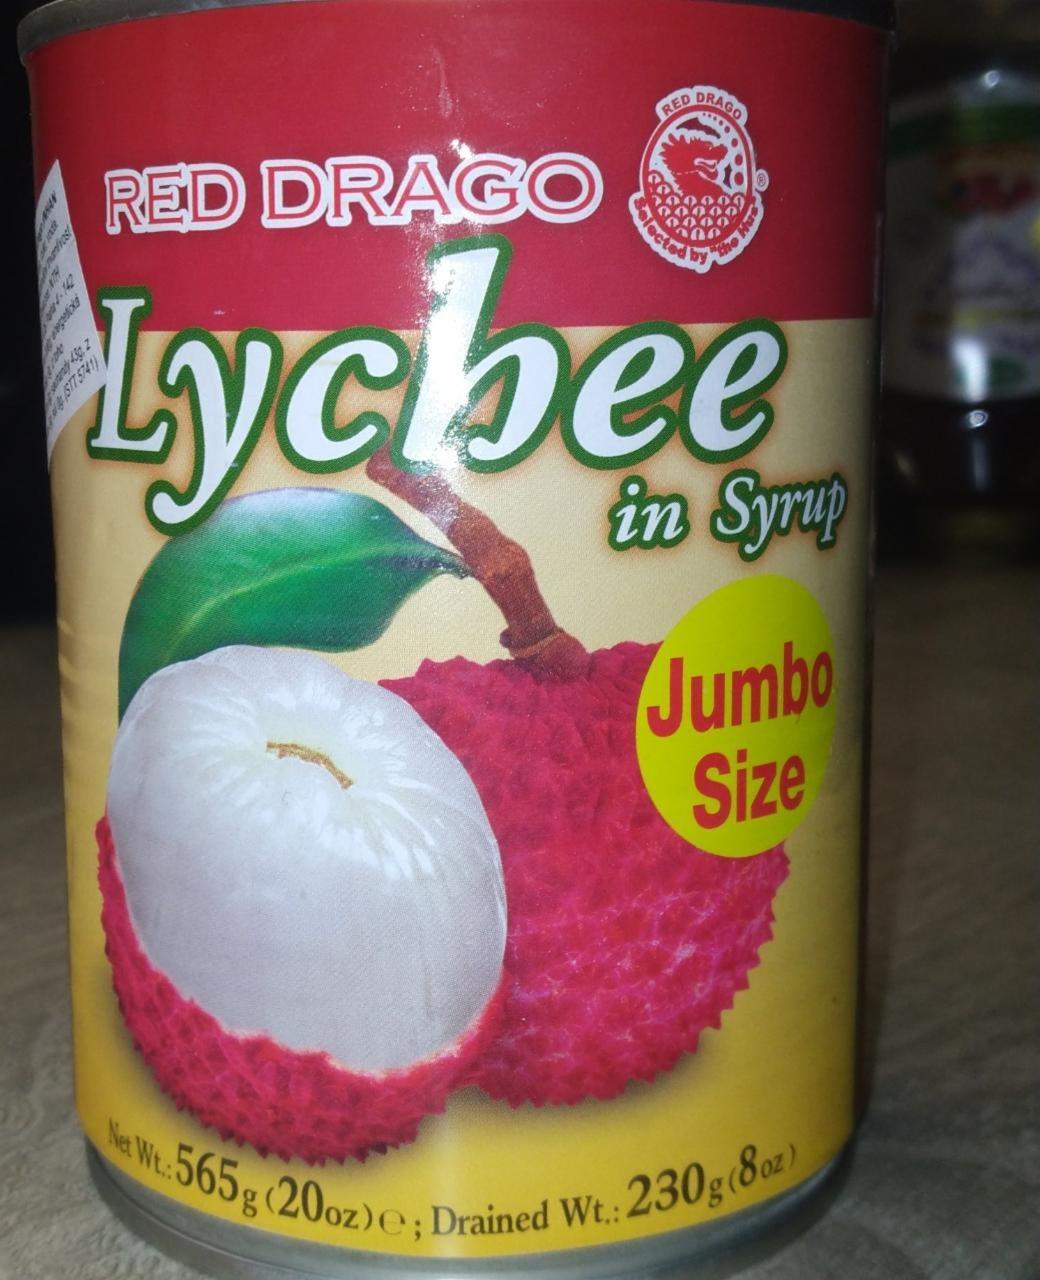 Fotografie - Lychee in Syrup Red Drago